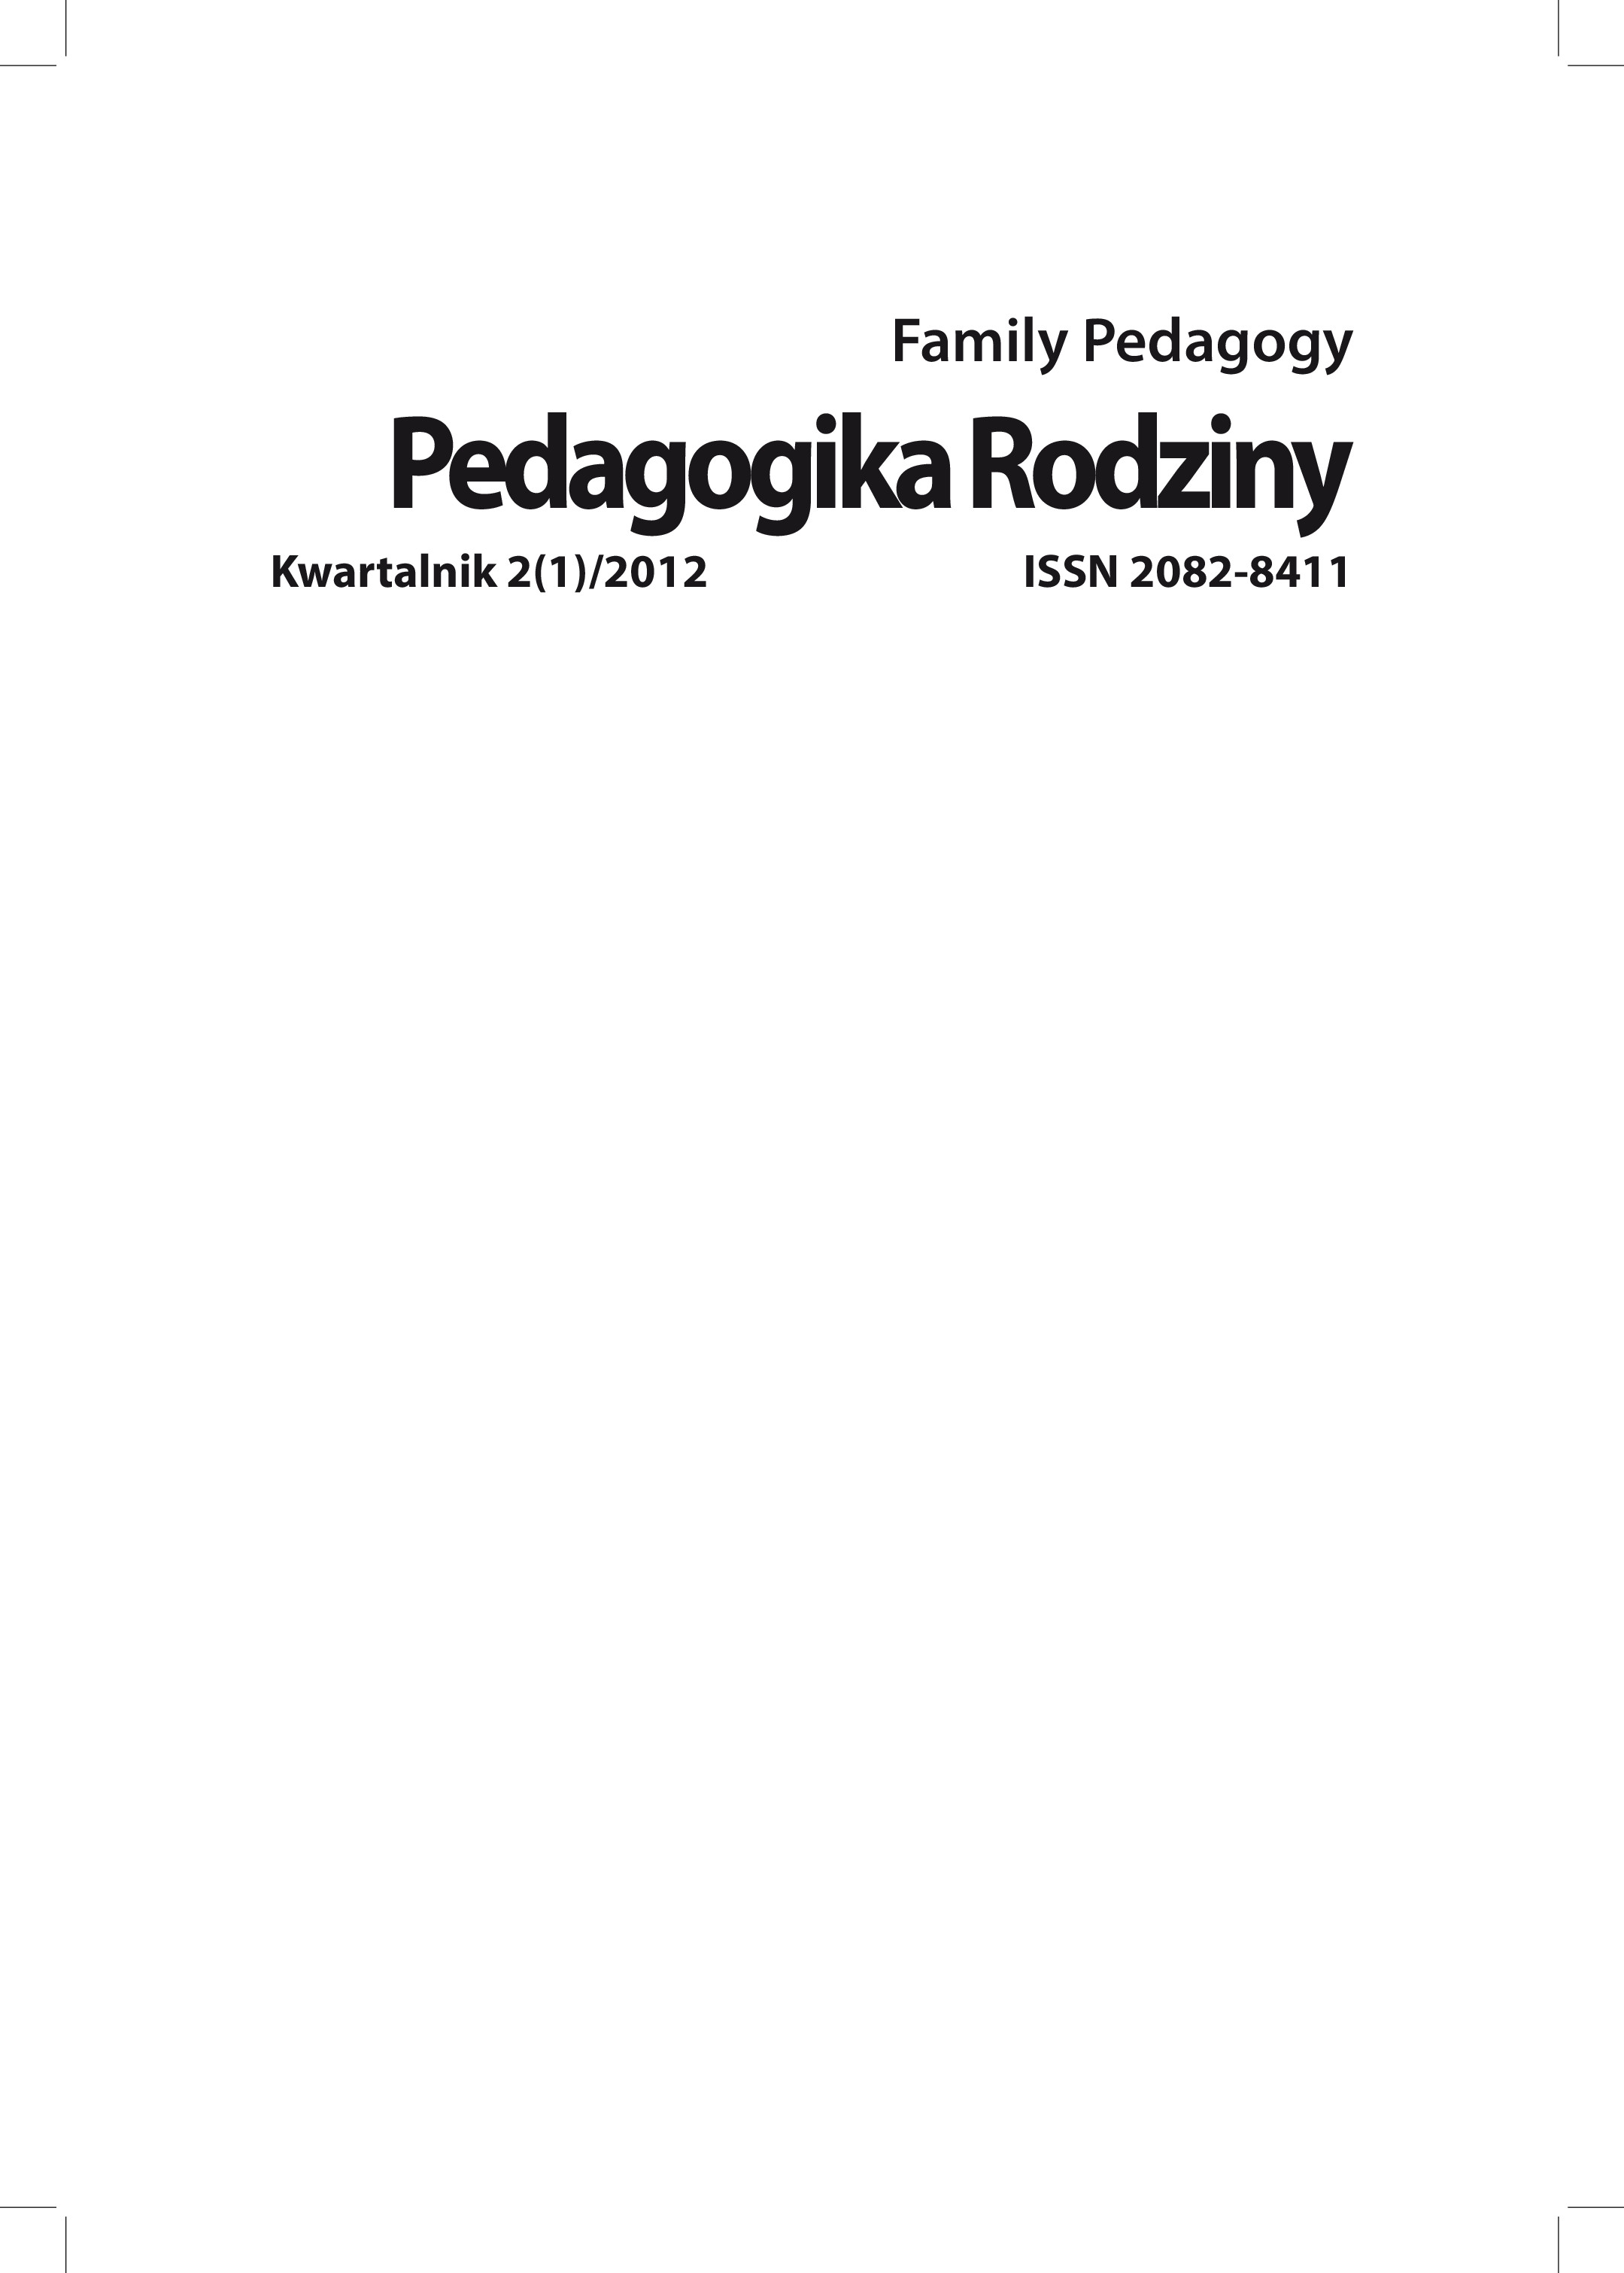 Upbringing in a Family as a Research Problem in Ukrainian Pedagogic Cover Image